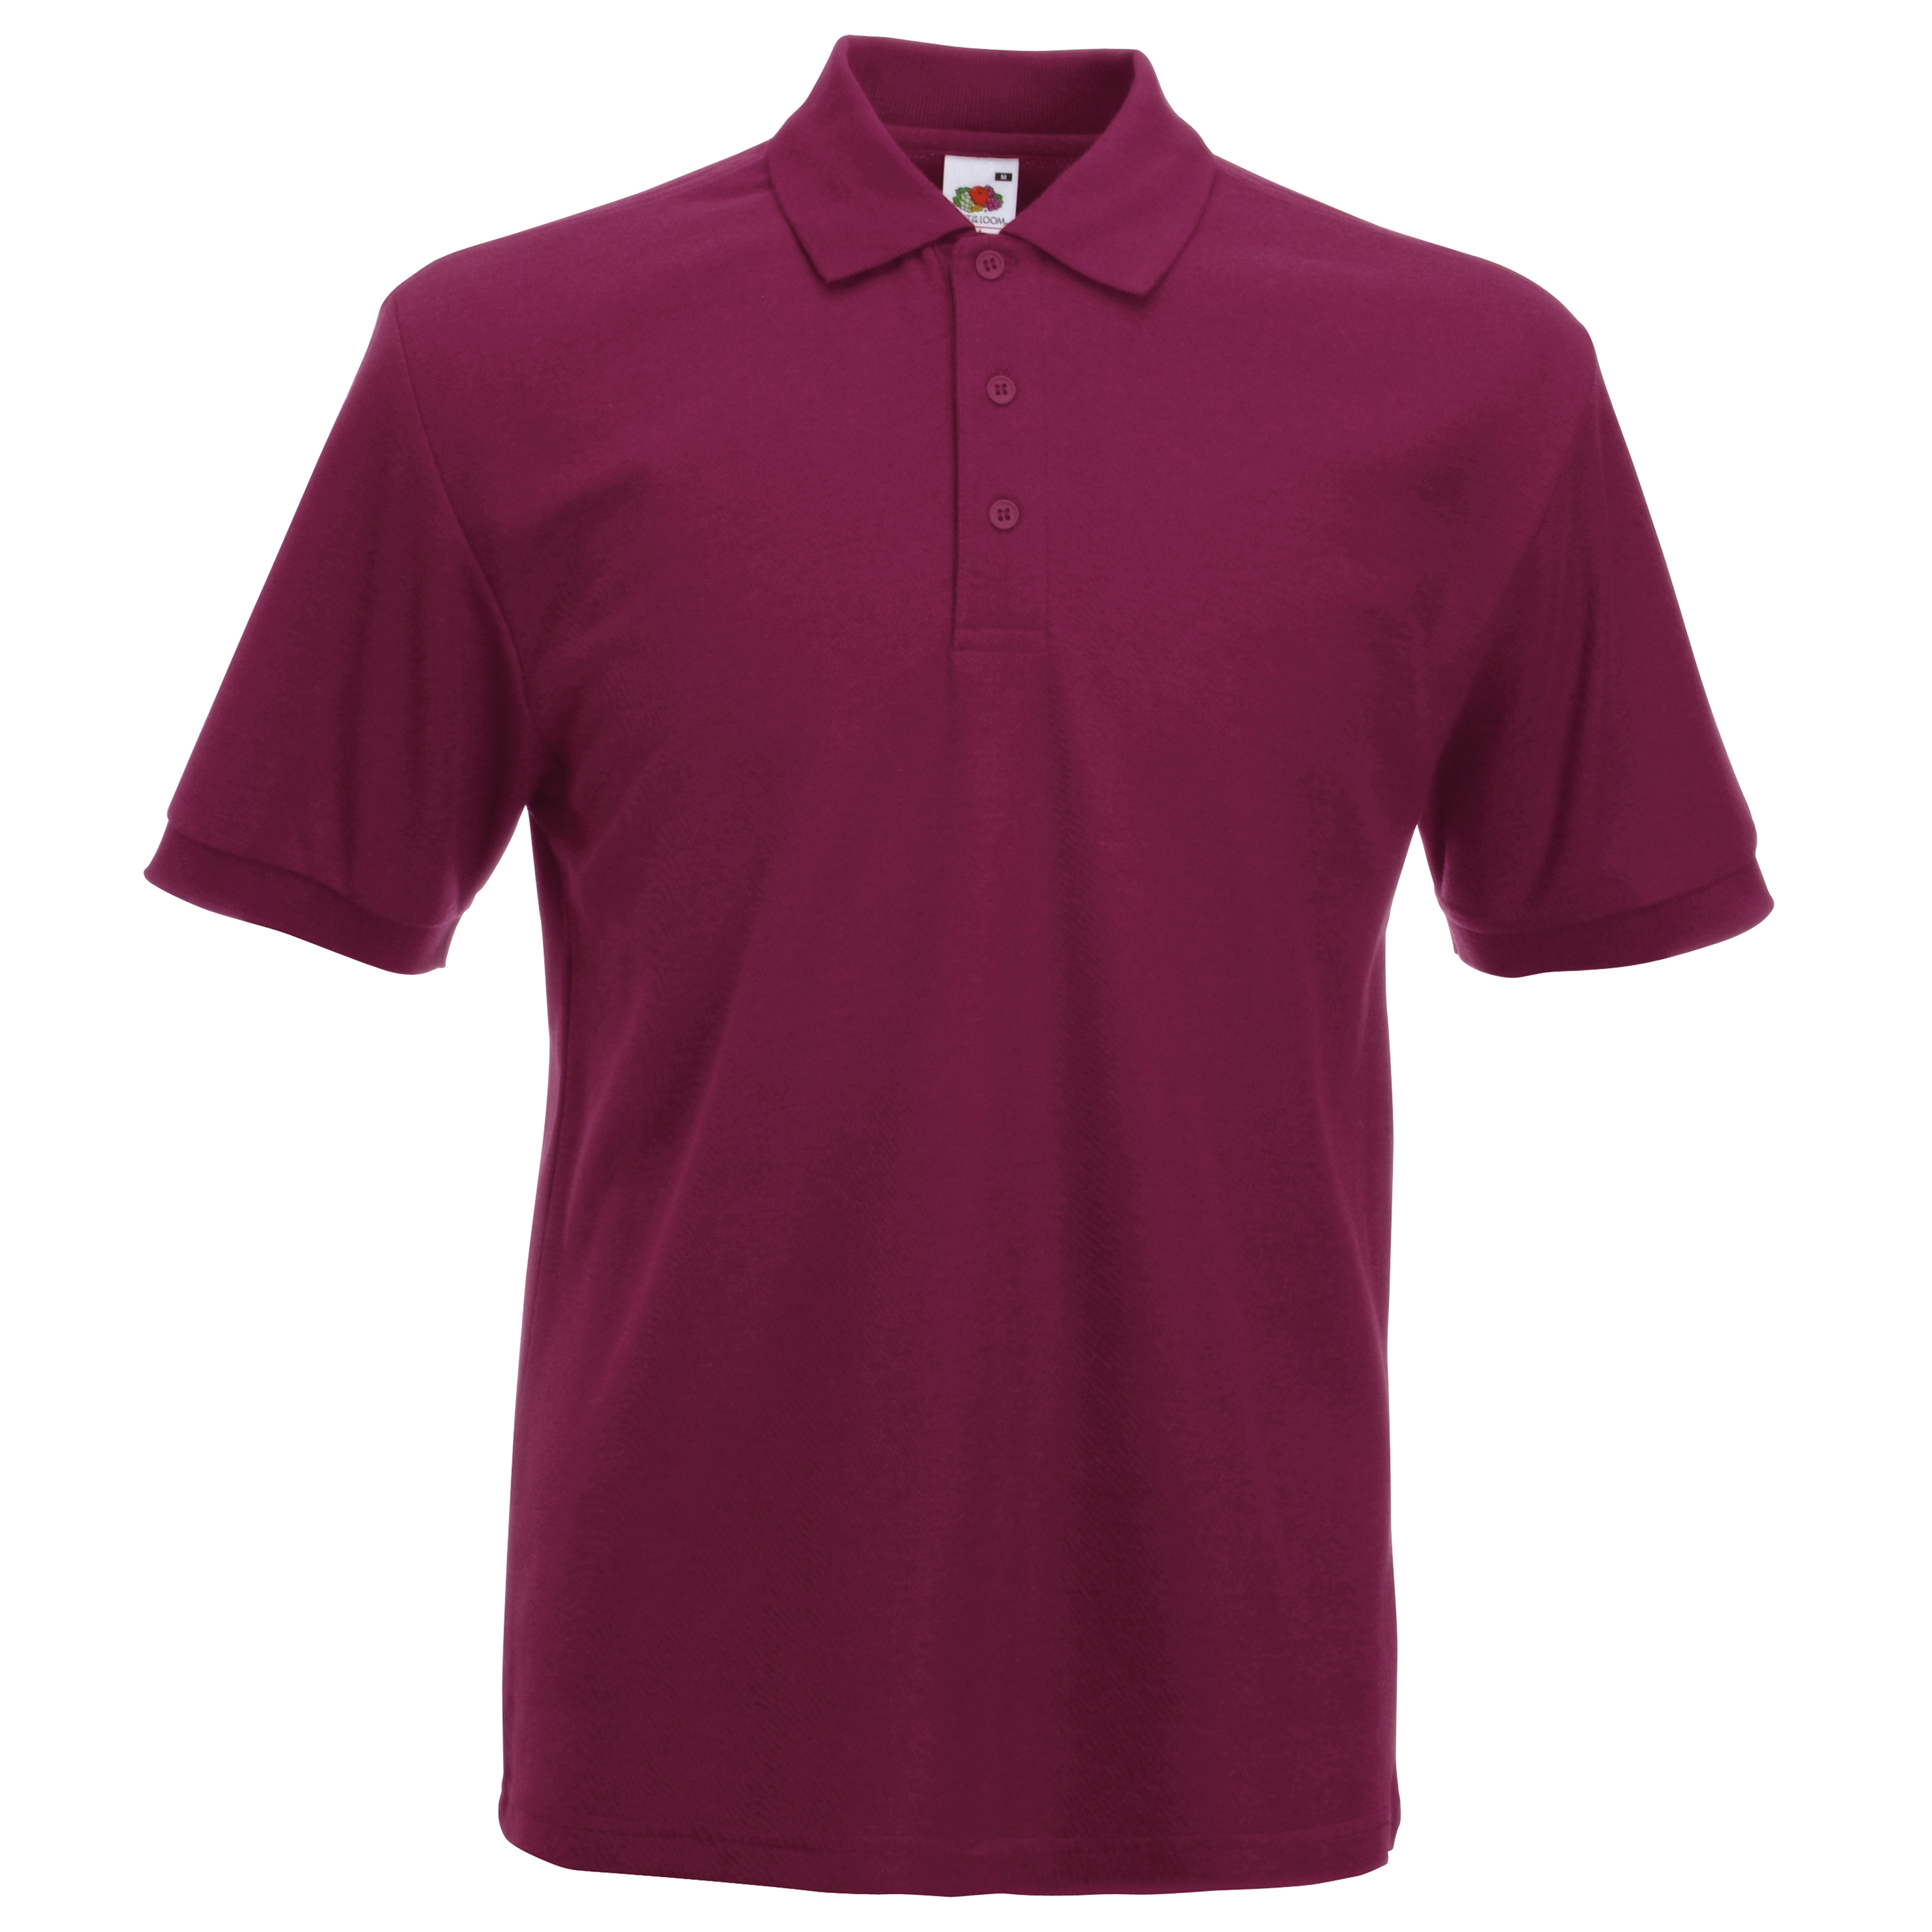 ax-httpswebsystems.s3.amazonaws.comtmp_for_downloadfruit-of-the-loom-heavyweight-65-35-polo-burgundy.jpg